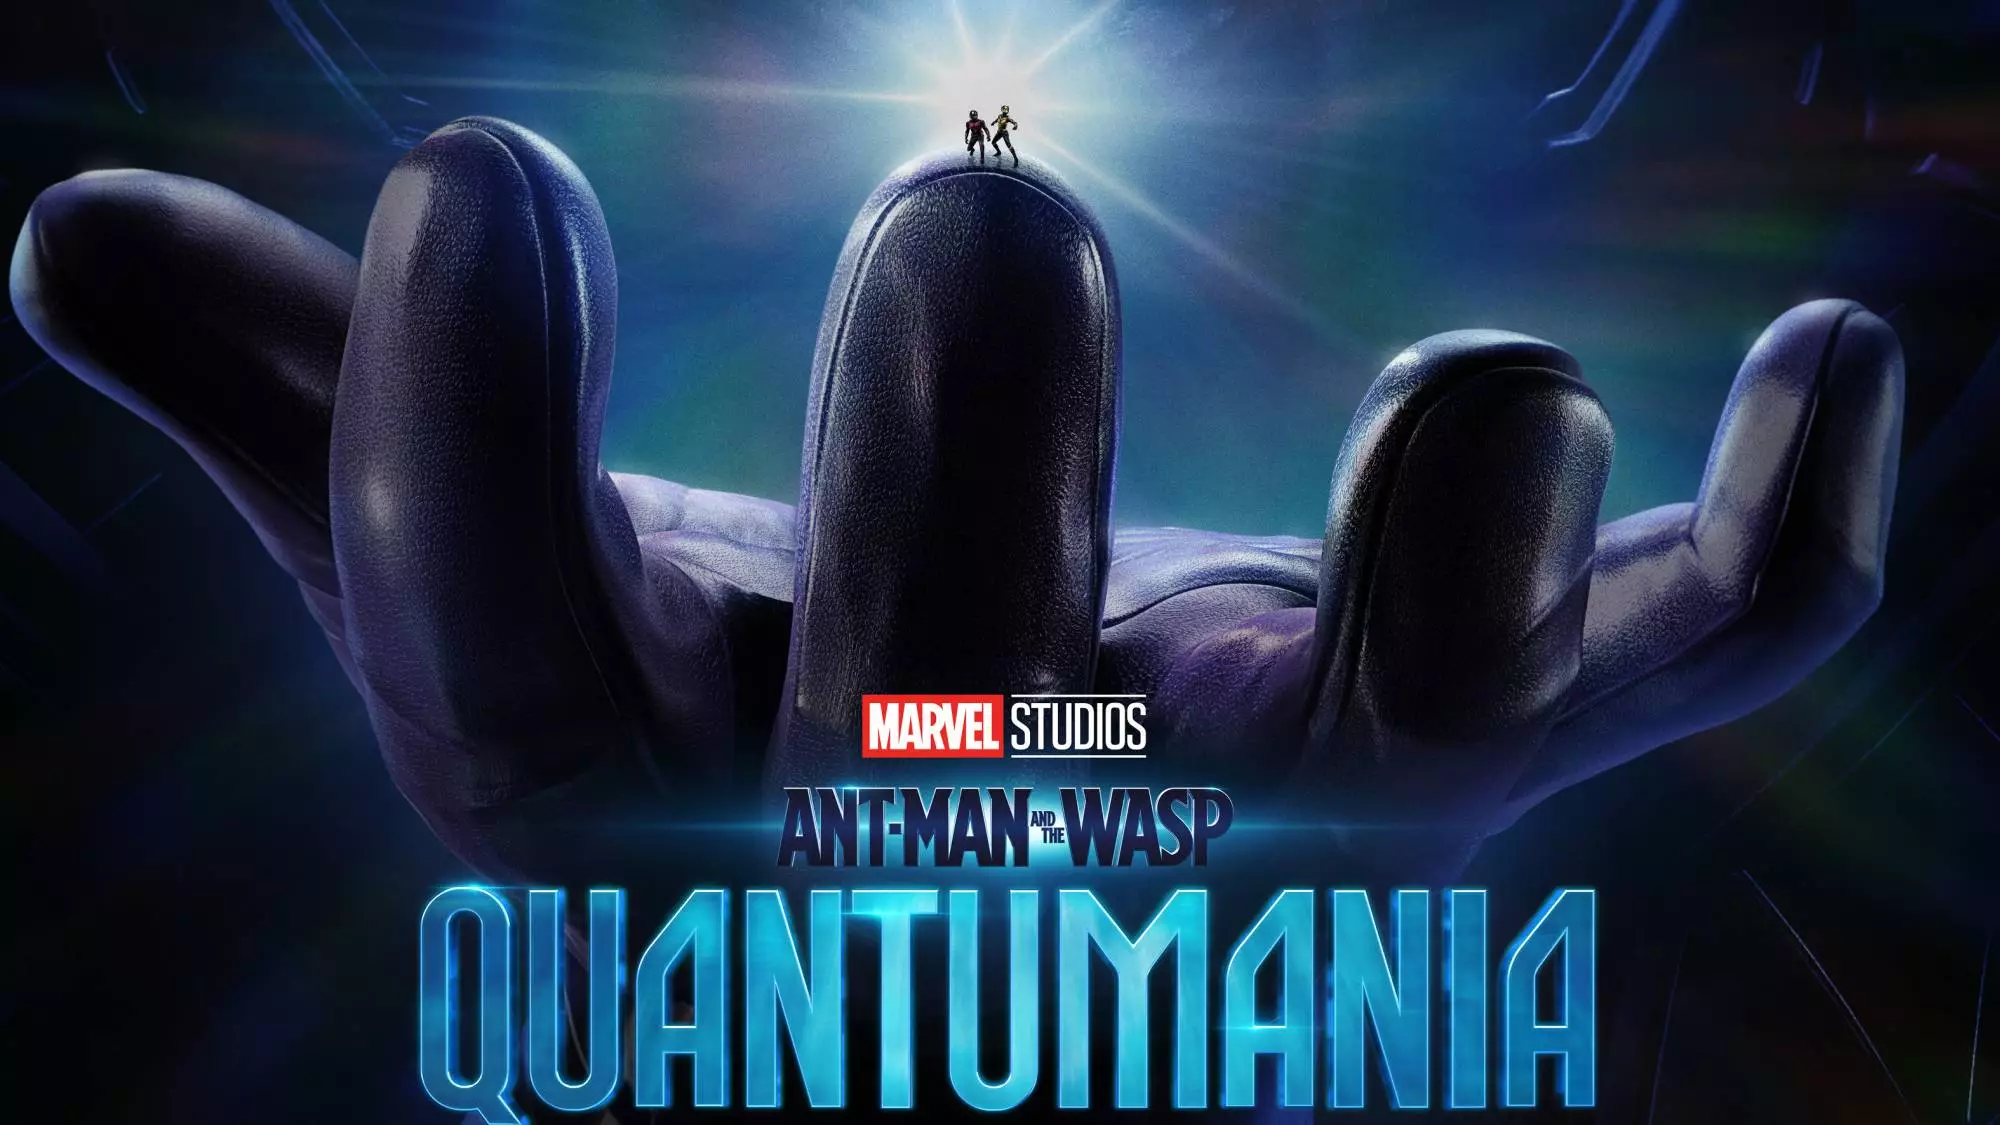 Ant-Man and the Wasp: Quantumania ab dem 15.02.23